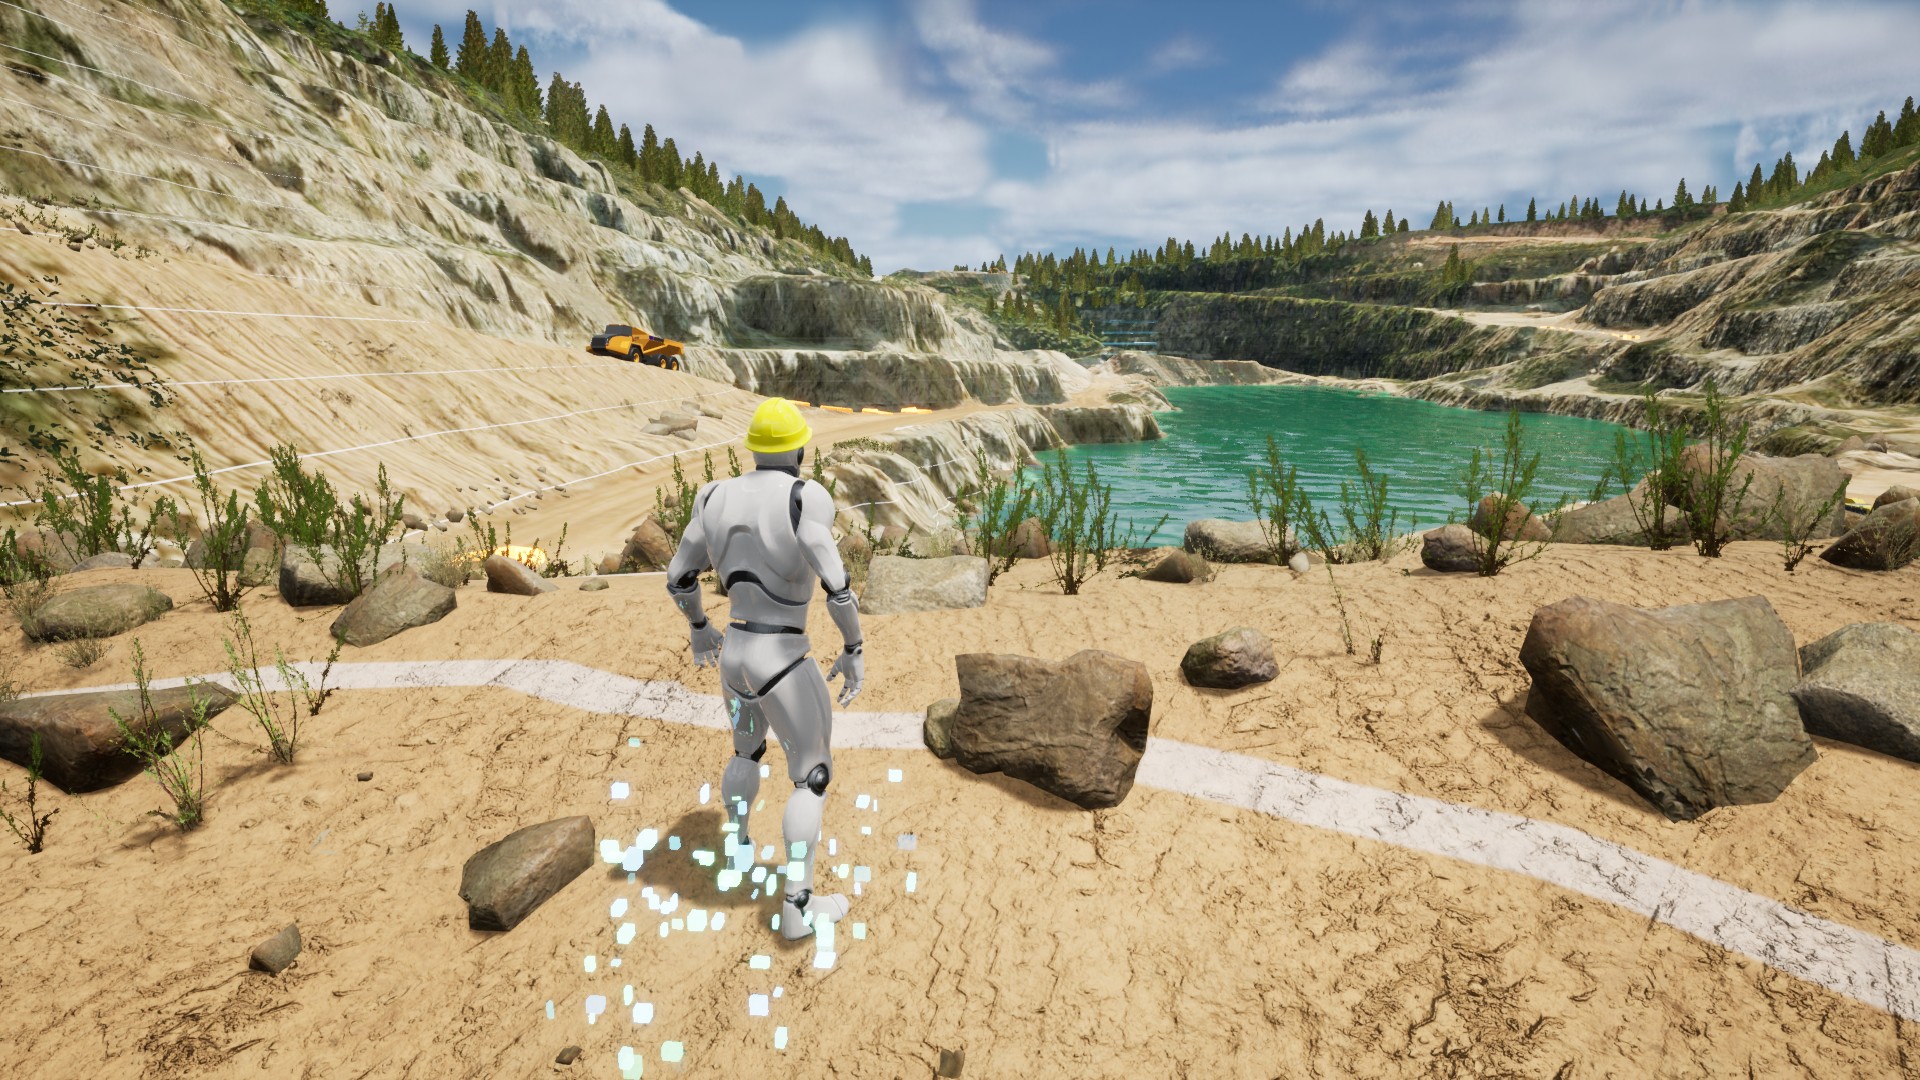 The integration of Geospatial data and Game Engines - in this case Cesium’s support of Epic Games’ Unreal Engine - is a crucial stepping stone toward the metaverse.